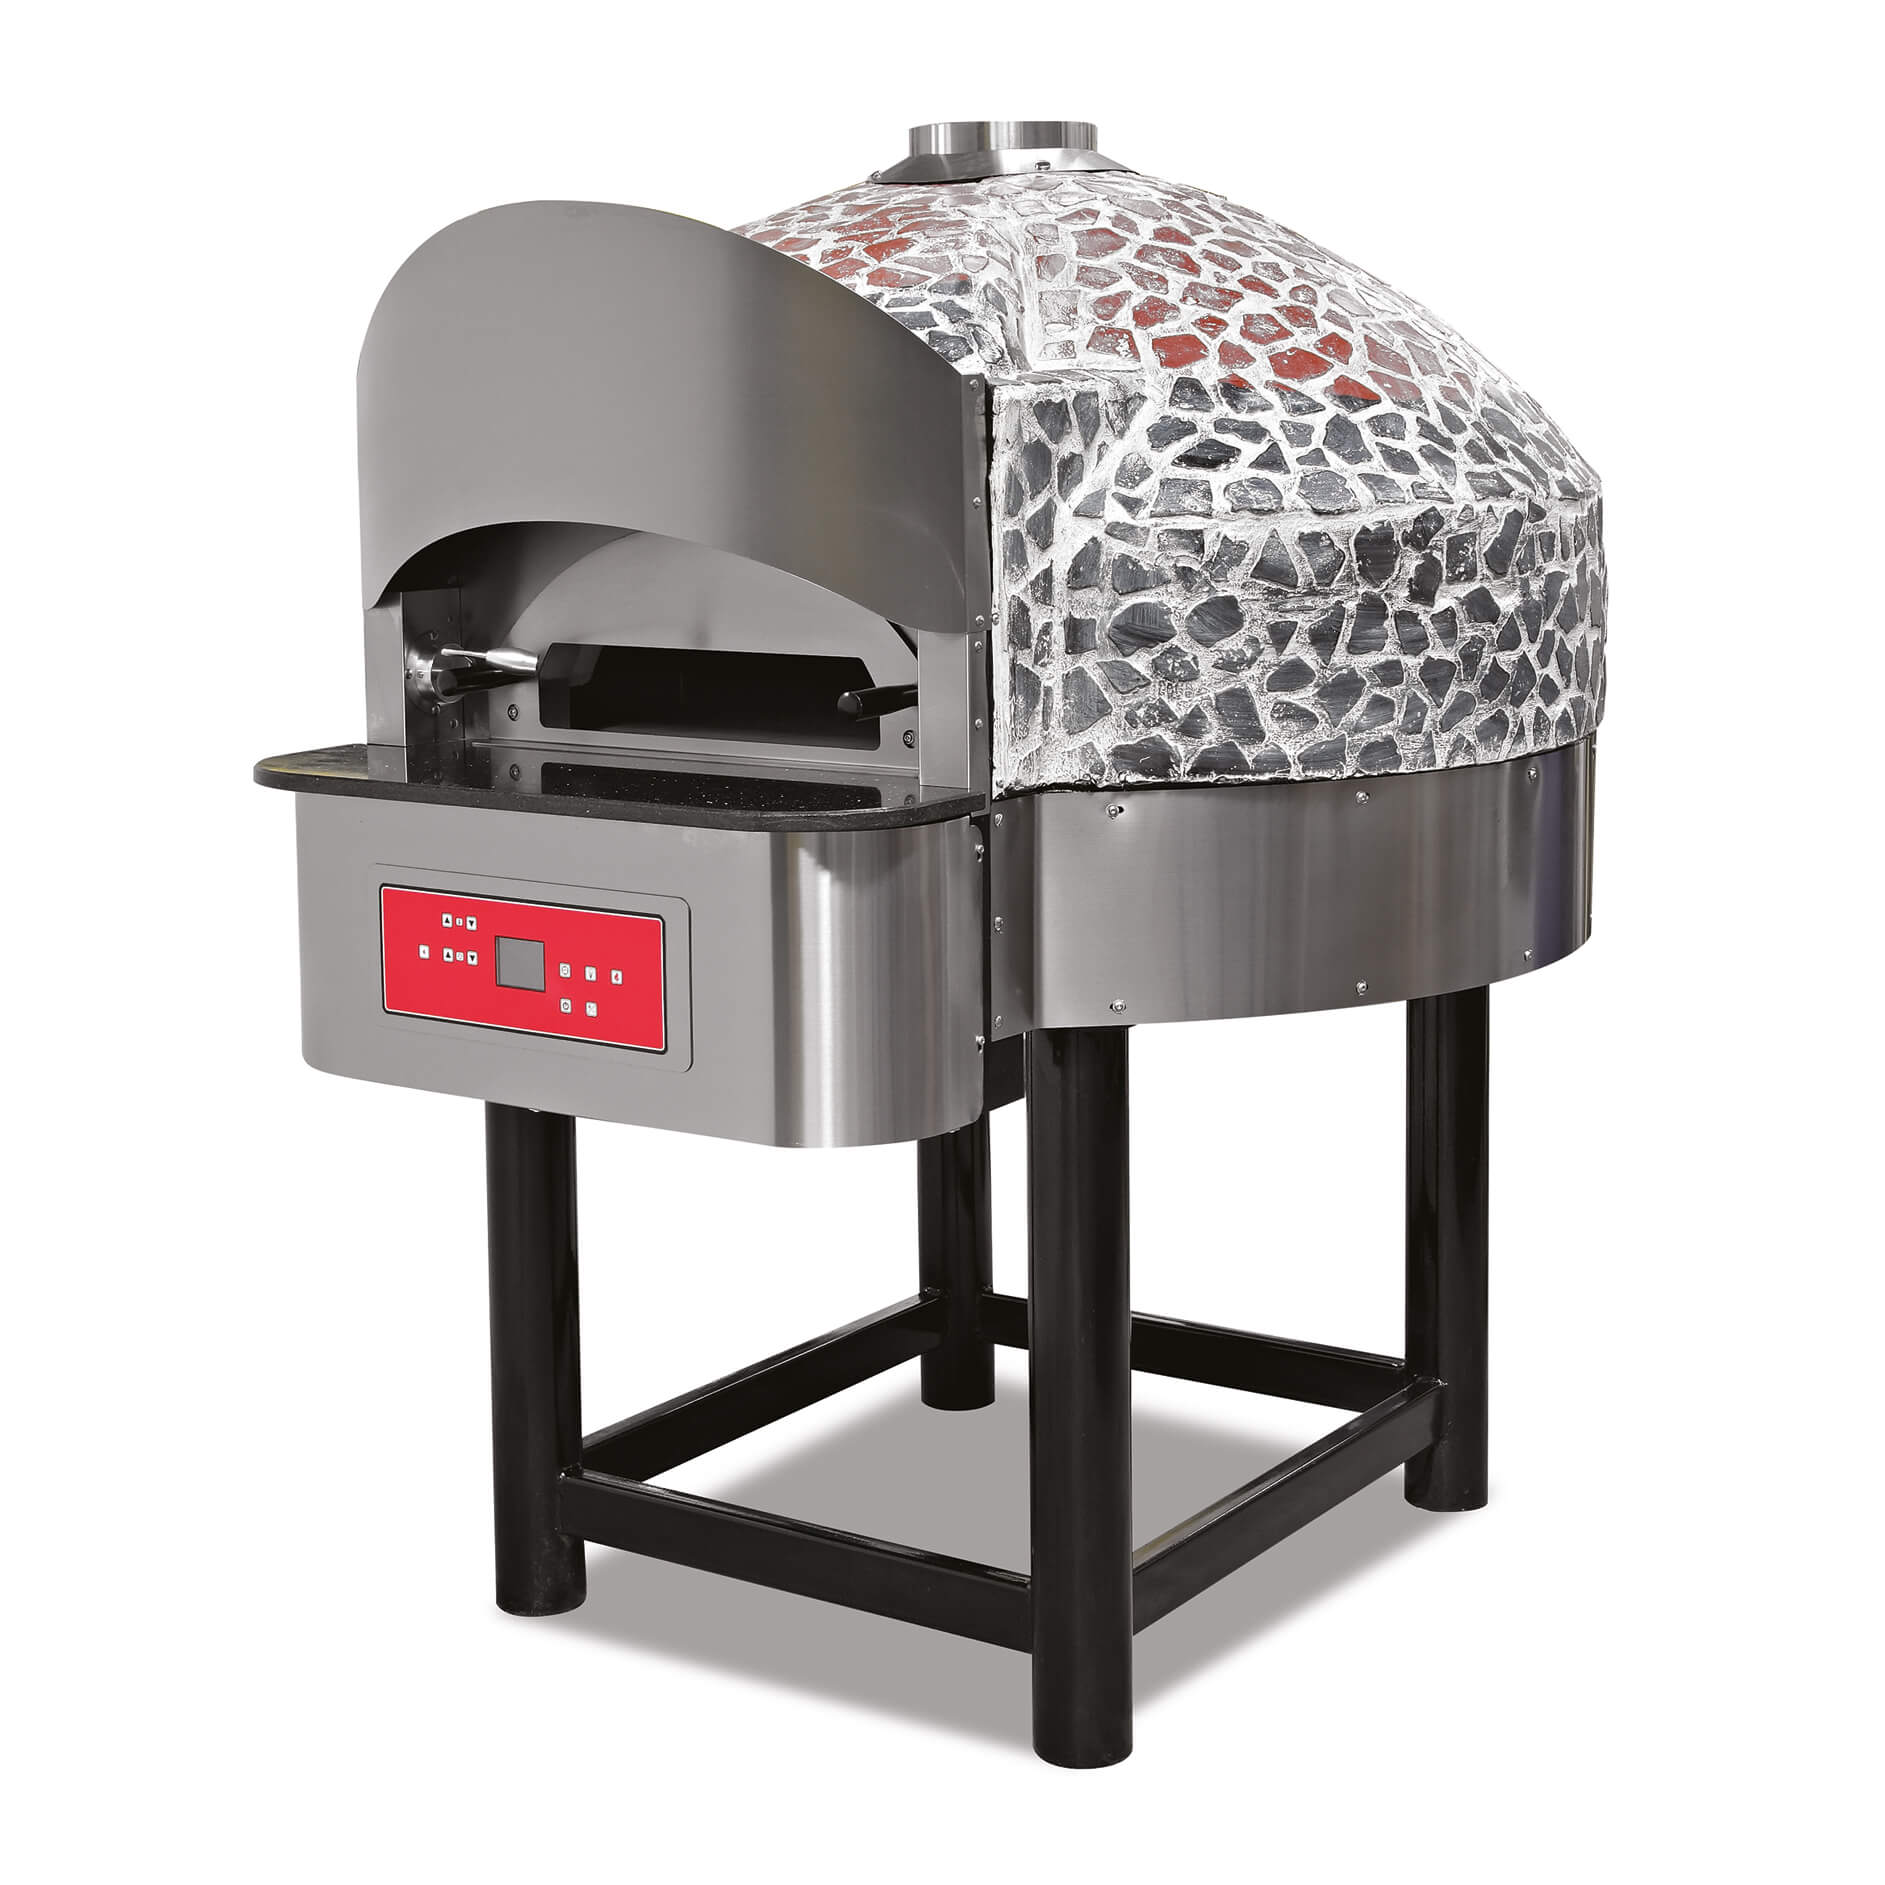 ROTATING GAS PIZZA OVEN